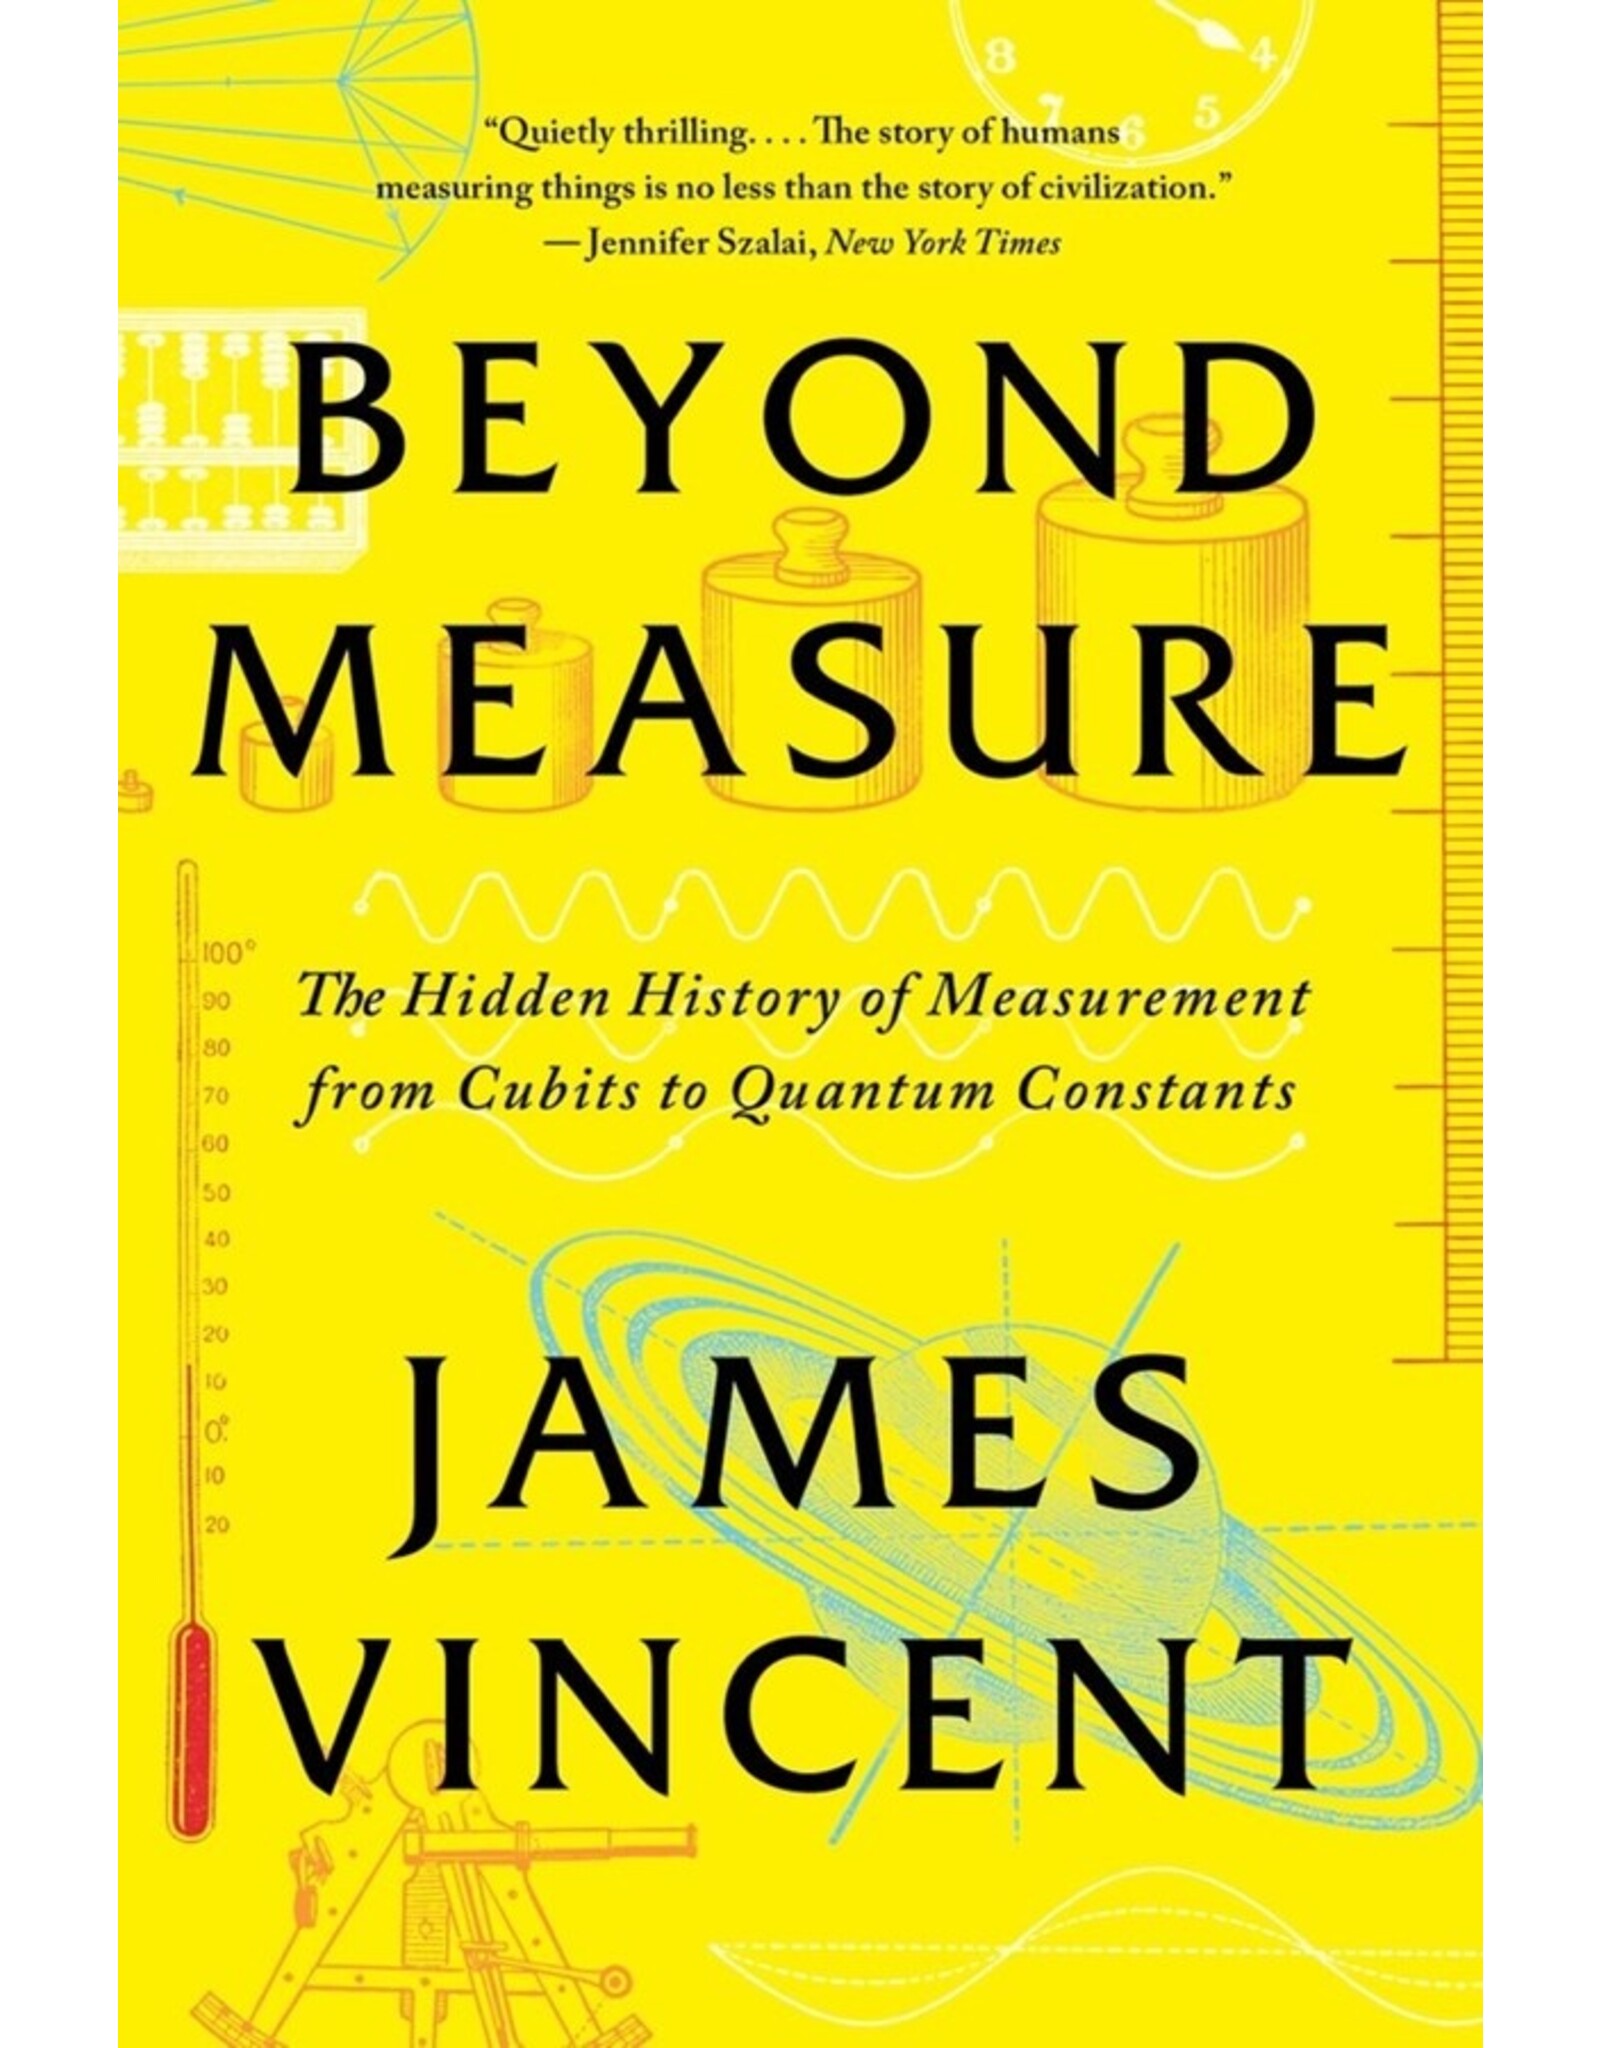 Books Beyond Measure: The Hidden History of Measurement from Cubits to Quantum Constants by James Vincent